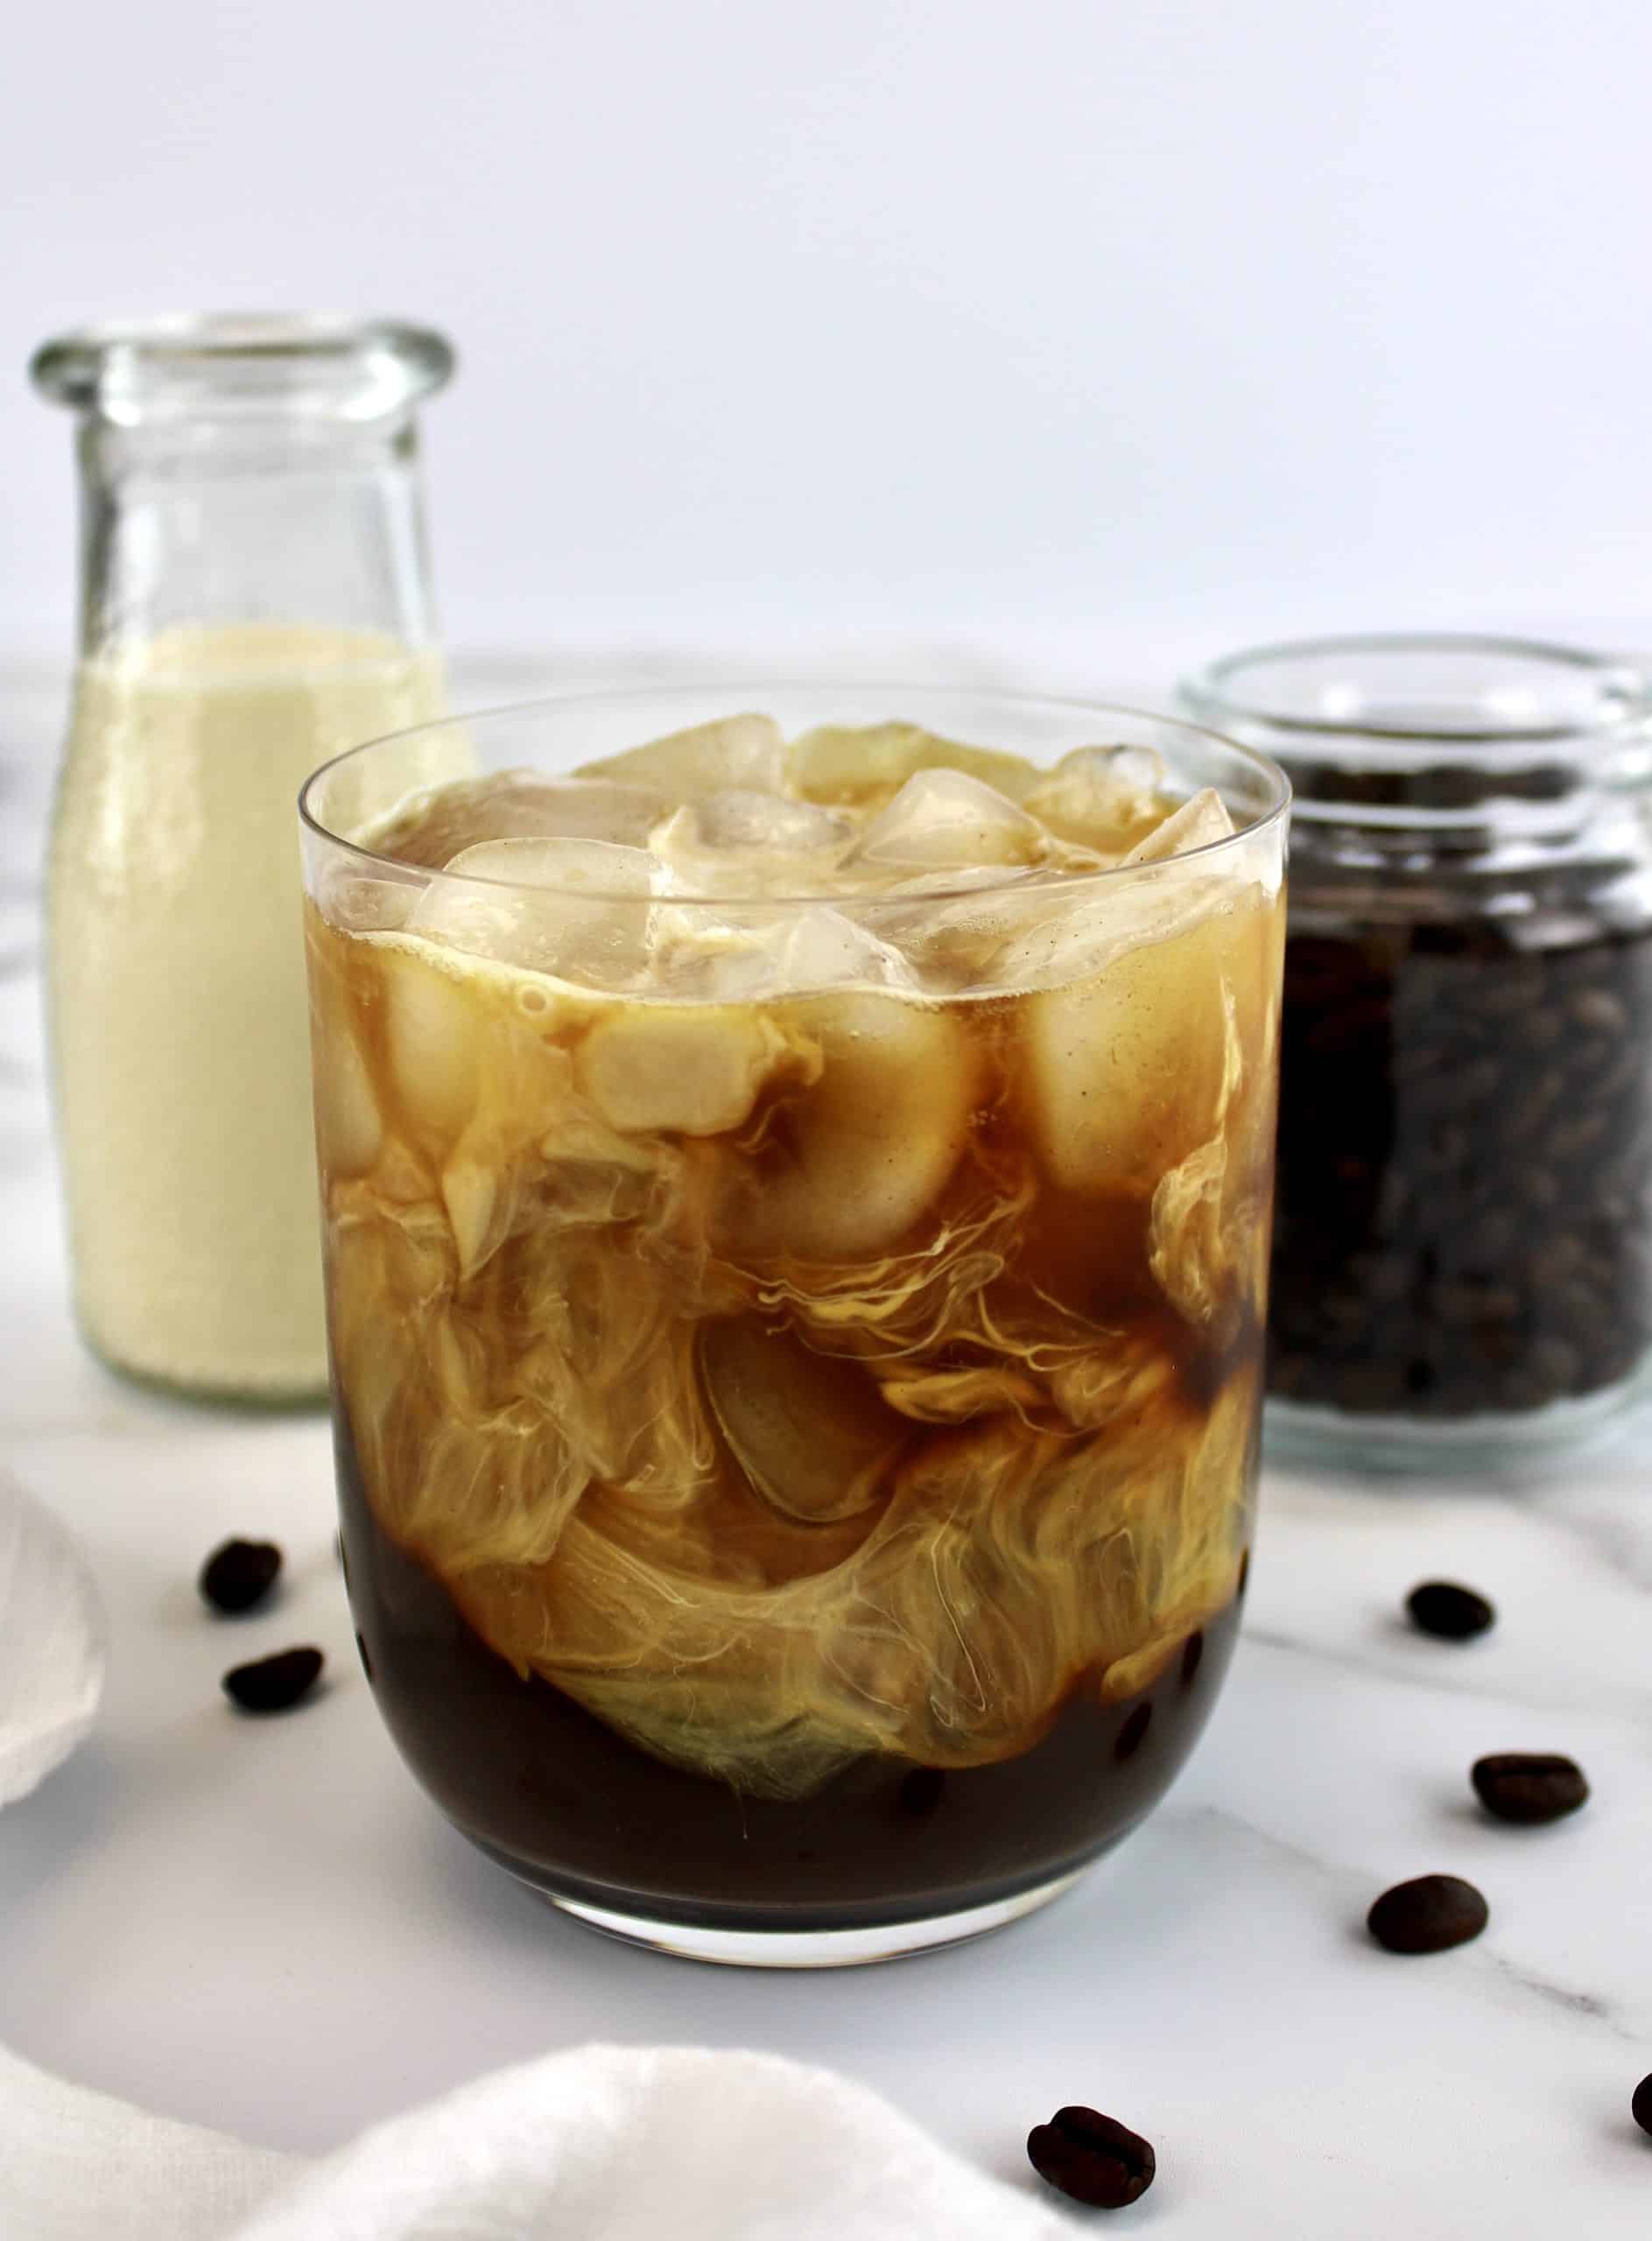 https://ketocookingchristian.com/wp-content/uploads/2022/12/Cold-Brew-Coffee1-scaled.jpeg